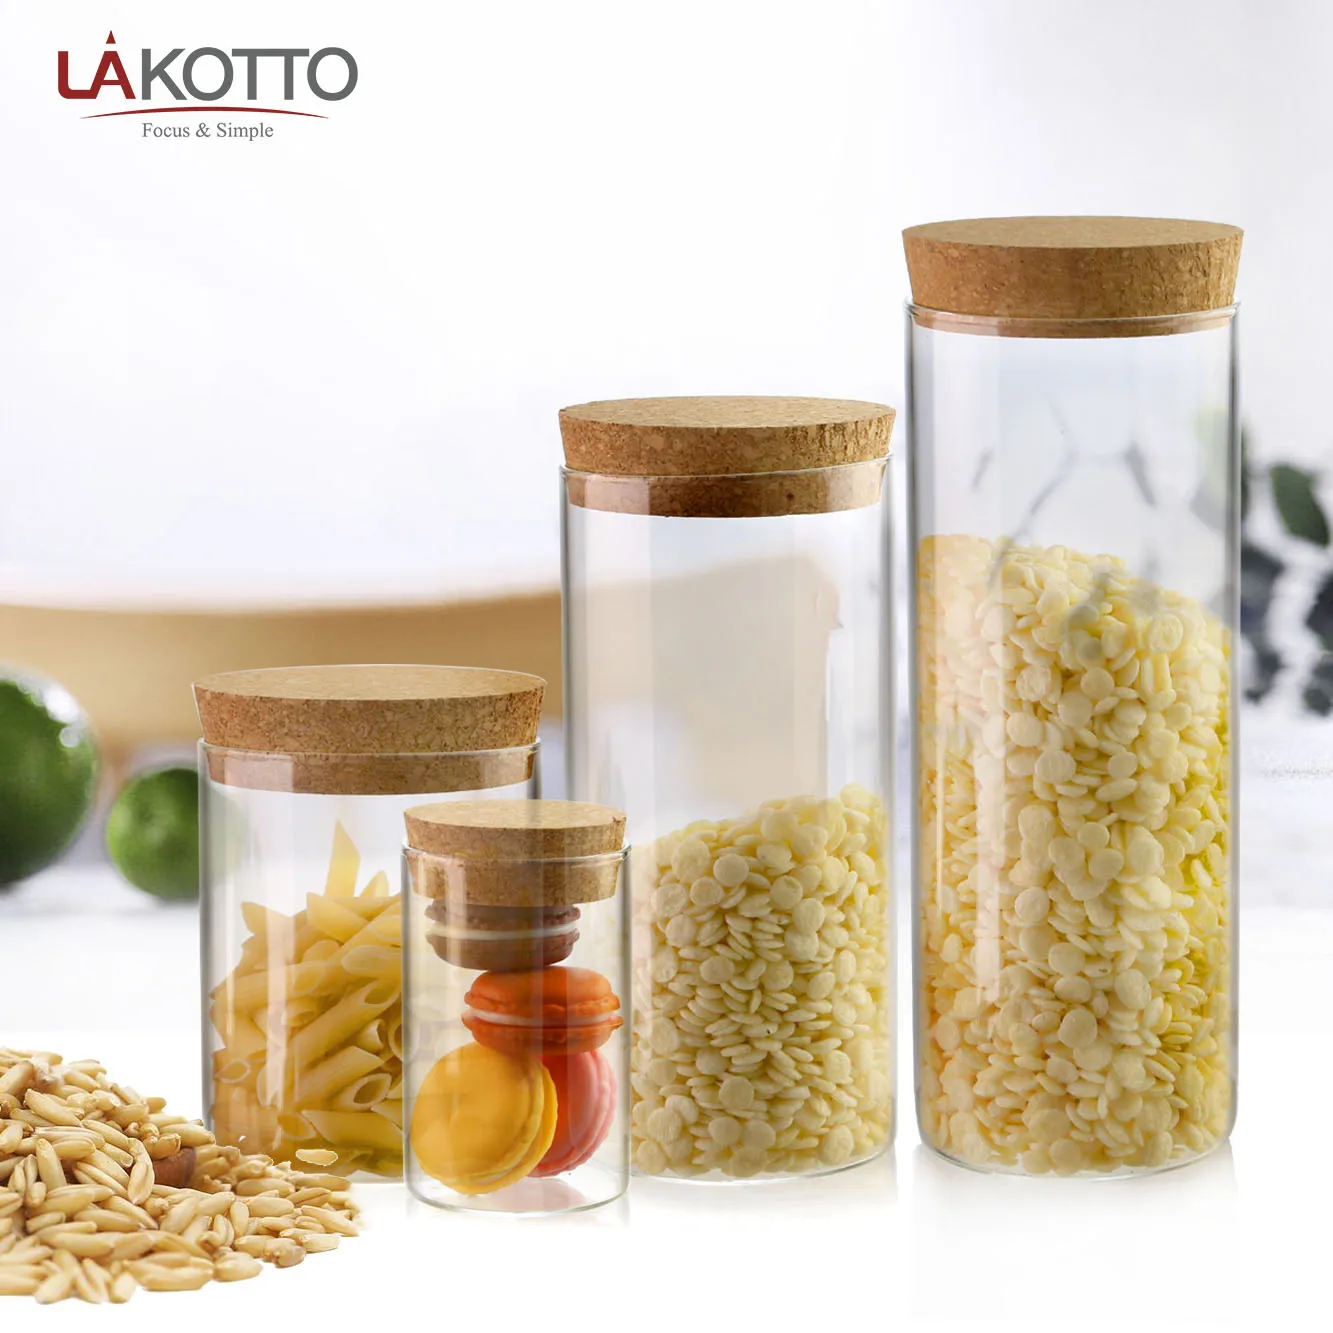 Clear Glass Food Storage Containers Jar Canister with Cork Lid Ideal for Storage Candy Snacks Rice Dry Foods Sugar Coffee Flour